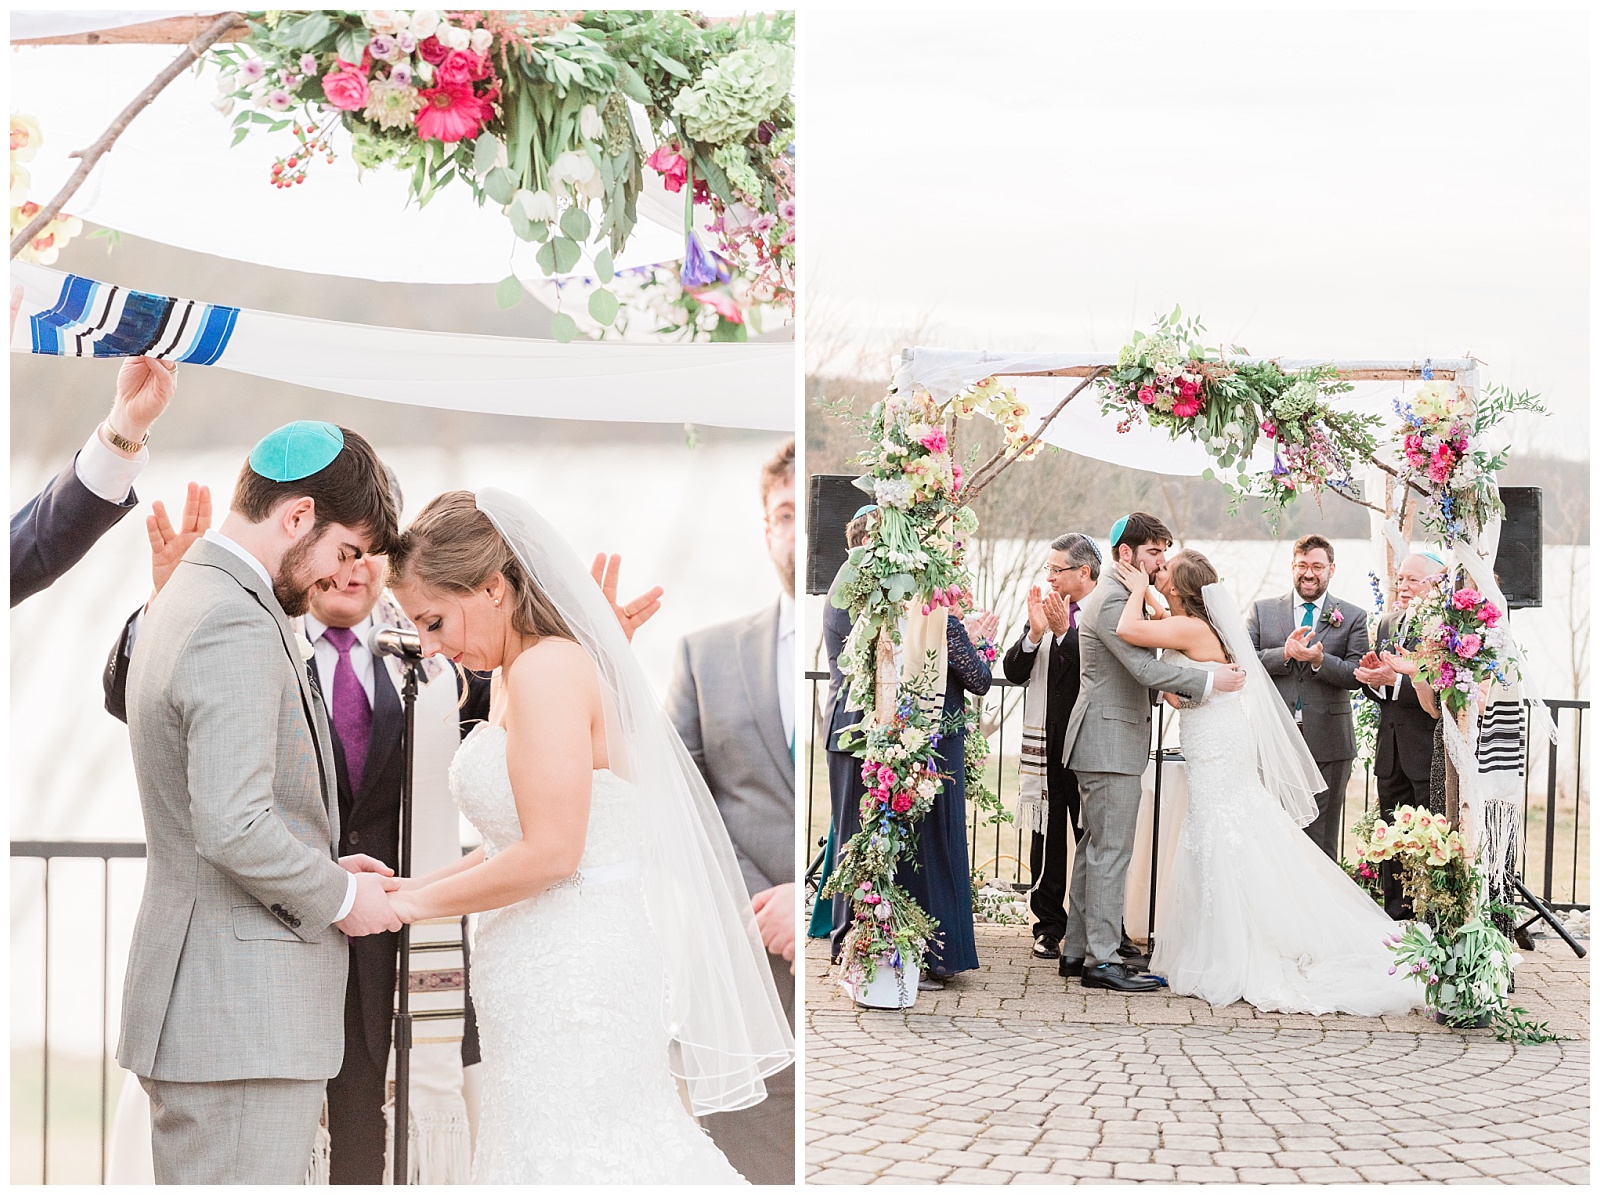 Jewish wedding ceremony under the chuppah, bride and groom pray together and have first kiss.